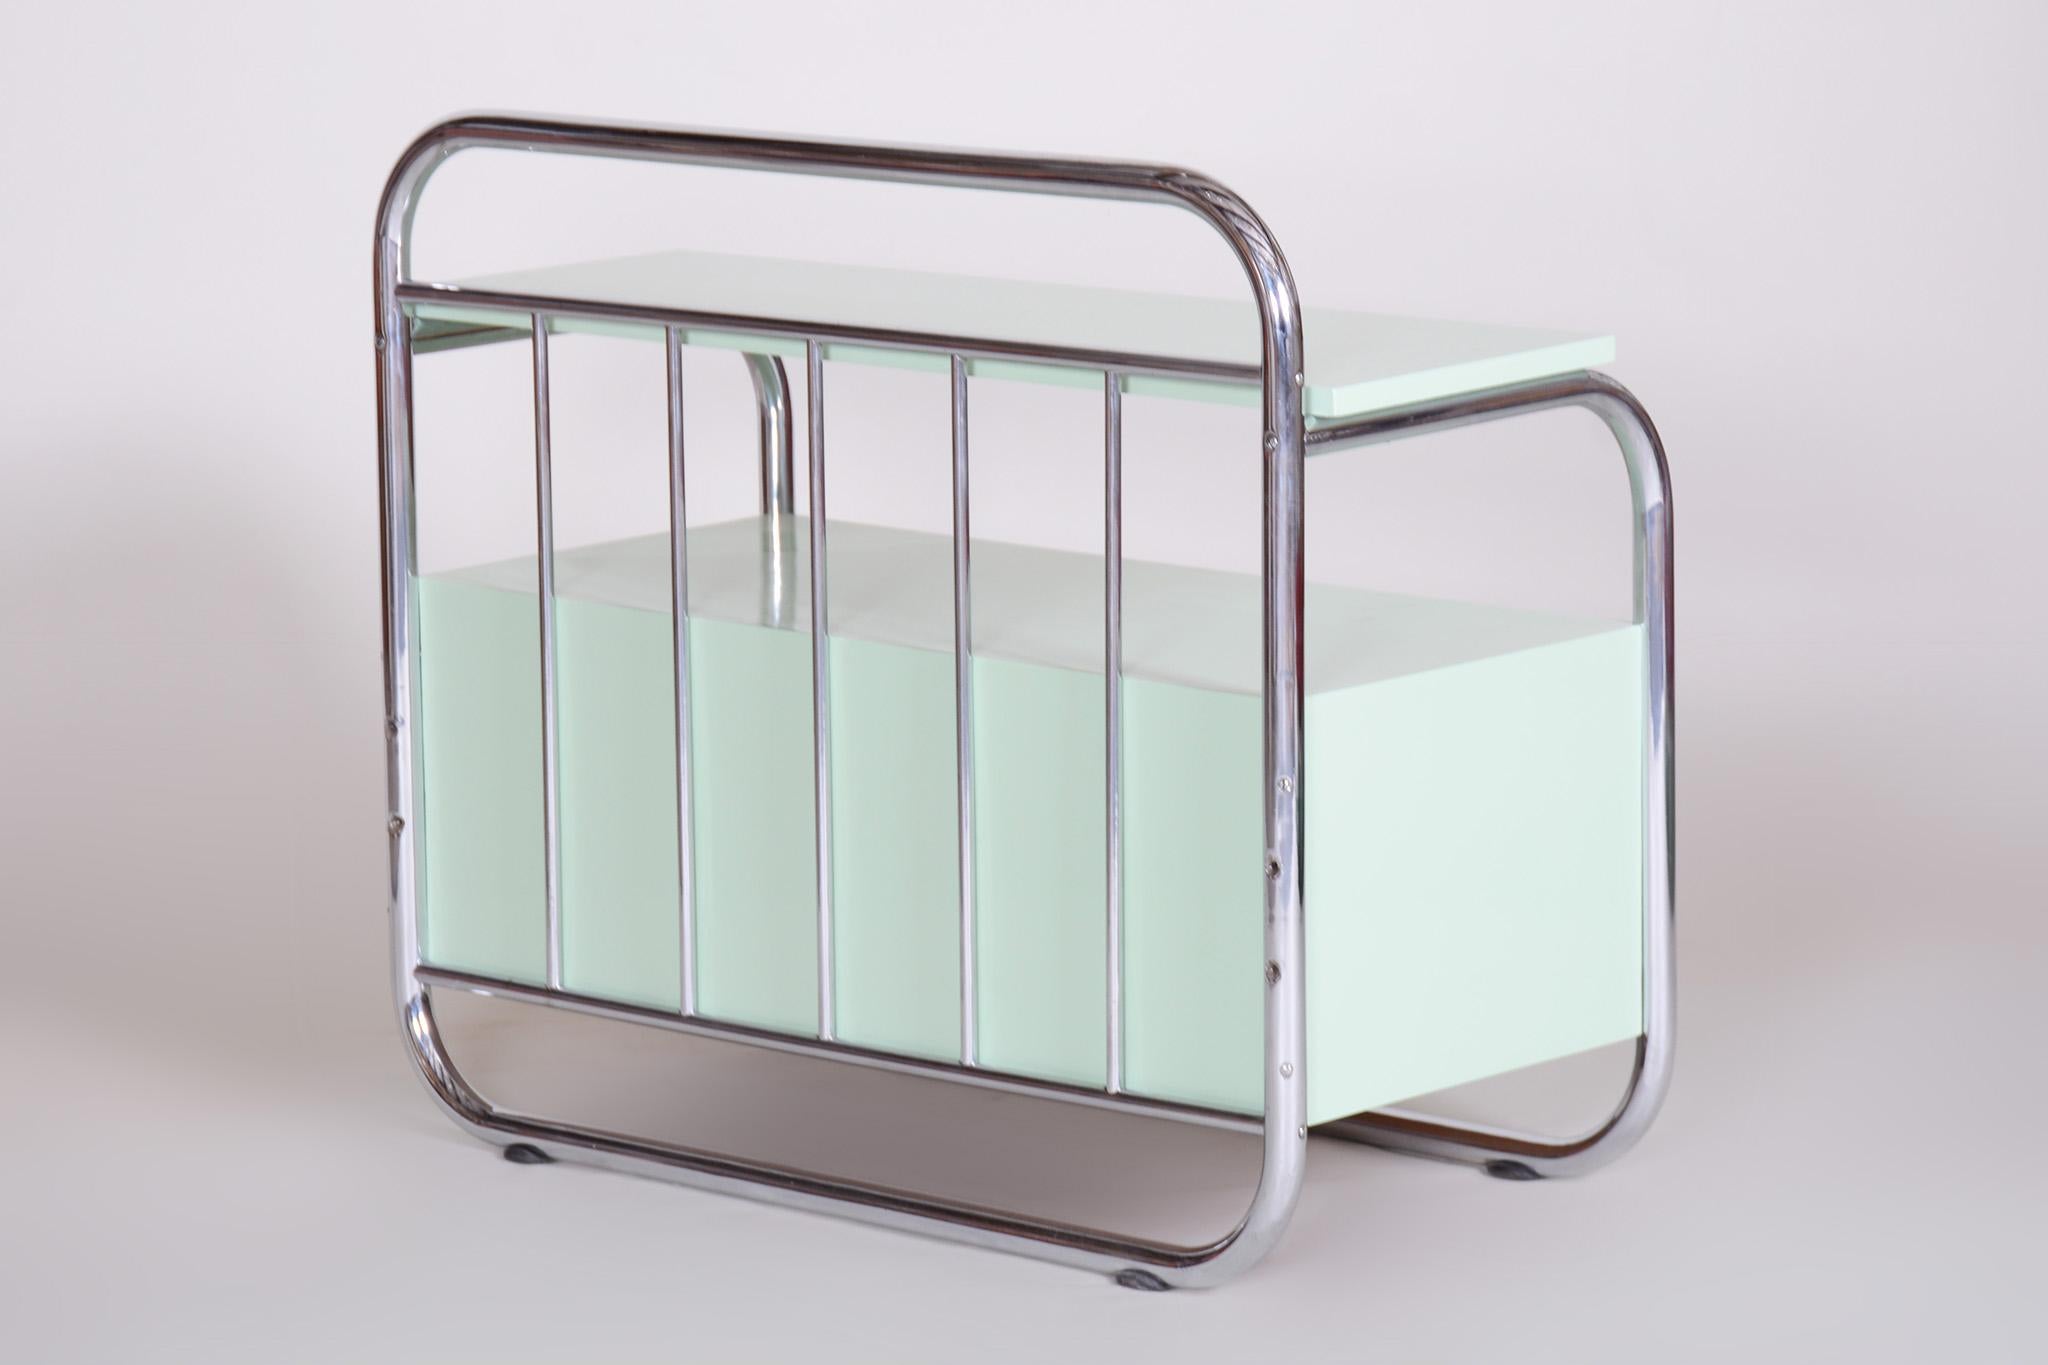 Restored Small Bauhaus Cabinet, Chrome-Plated Steel, Wood, Czechia, 1930s For Sale 6